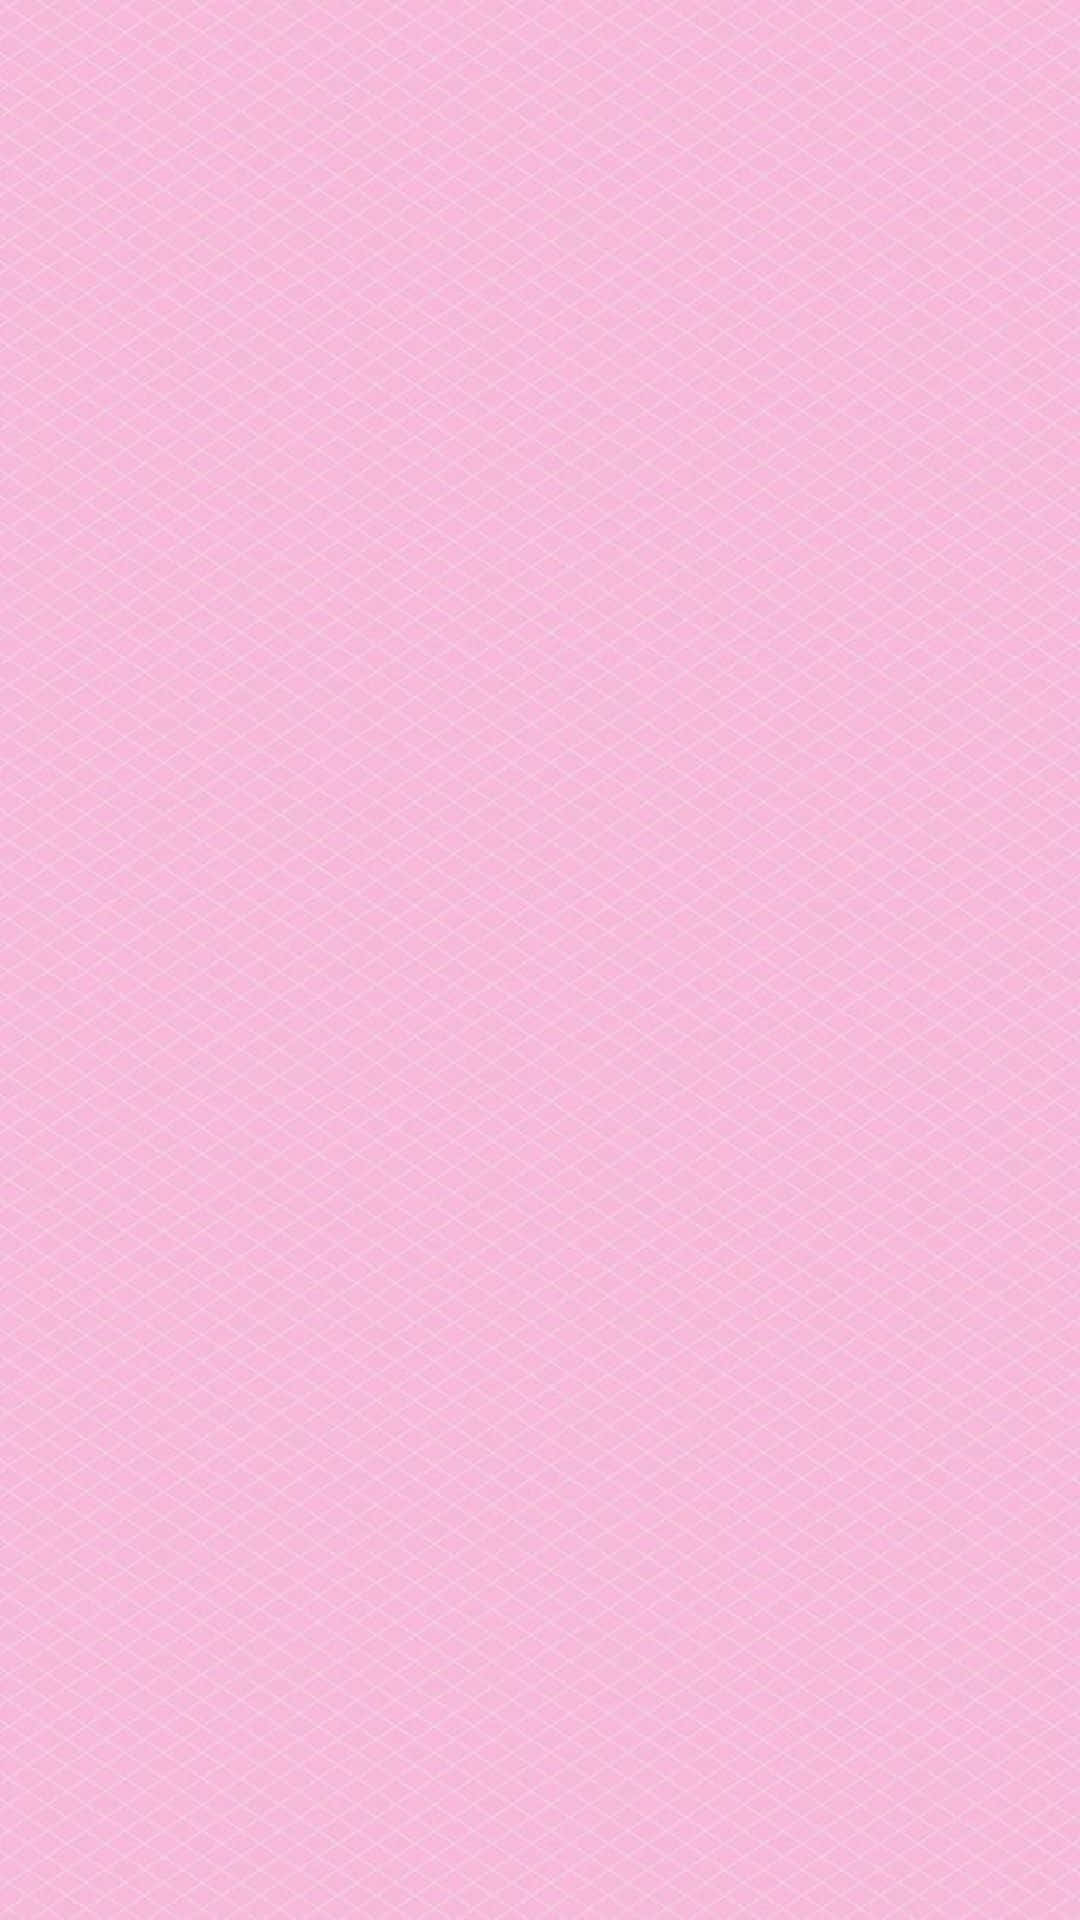 Stunning Pink Solid Background